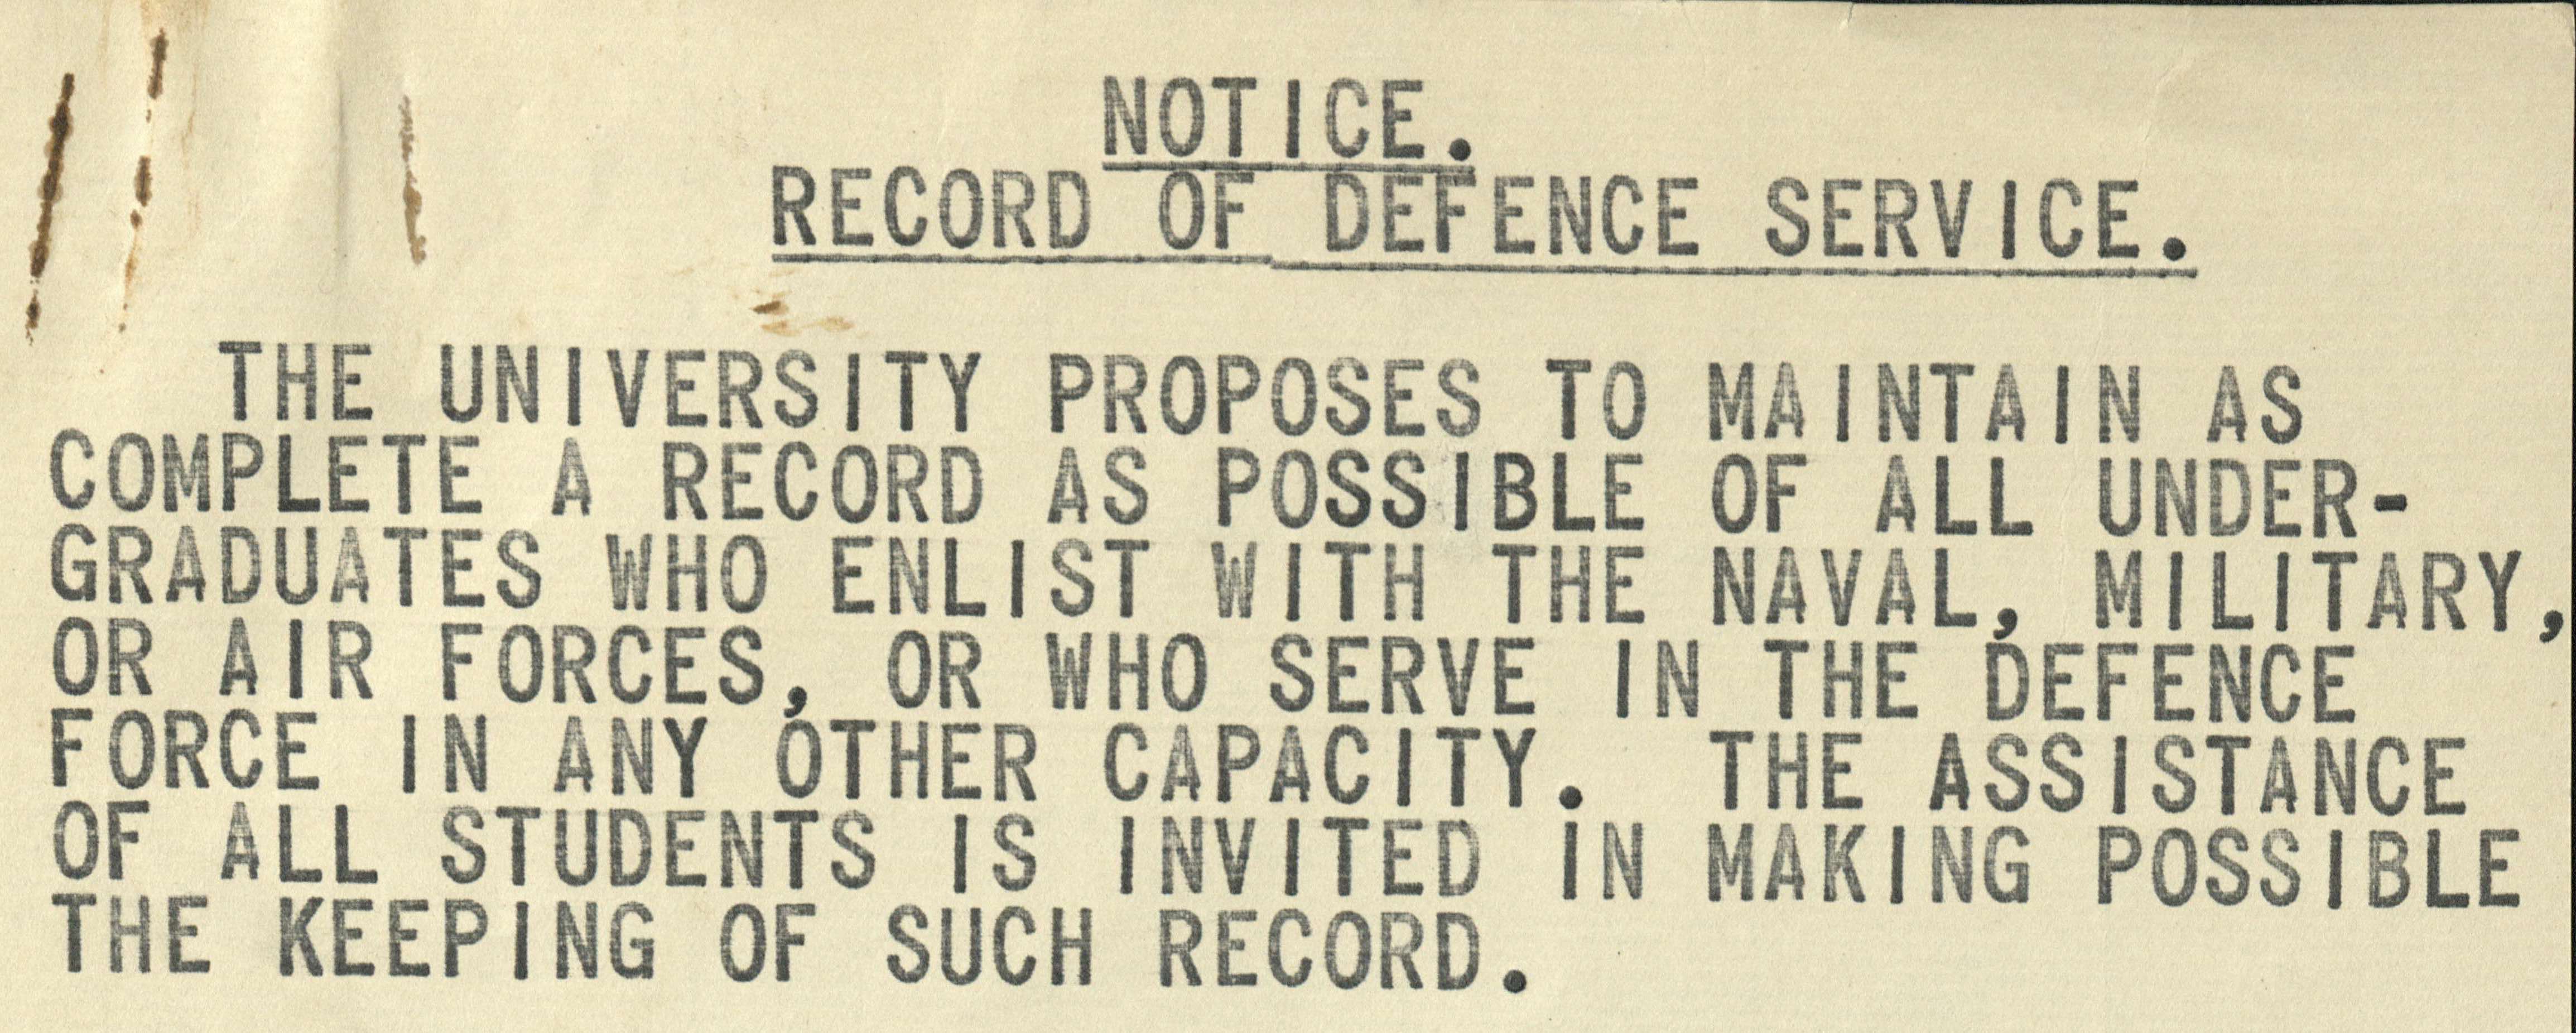 Notice. Record of Defence service. The University proposes to maintain as complete a record as possible of all undergraduates who enlist with the naval, military, or air forces, or who serve in the Defence Force in any other capacity. The assistance of all students is invited in making possible the keeping of such record.